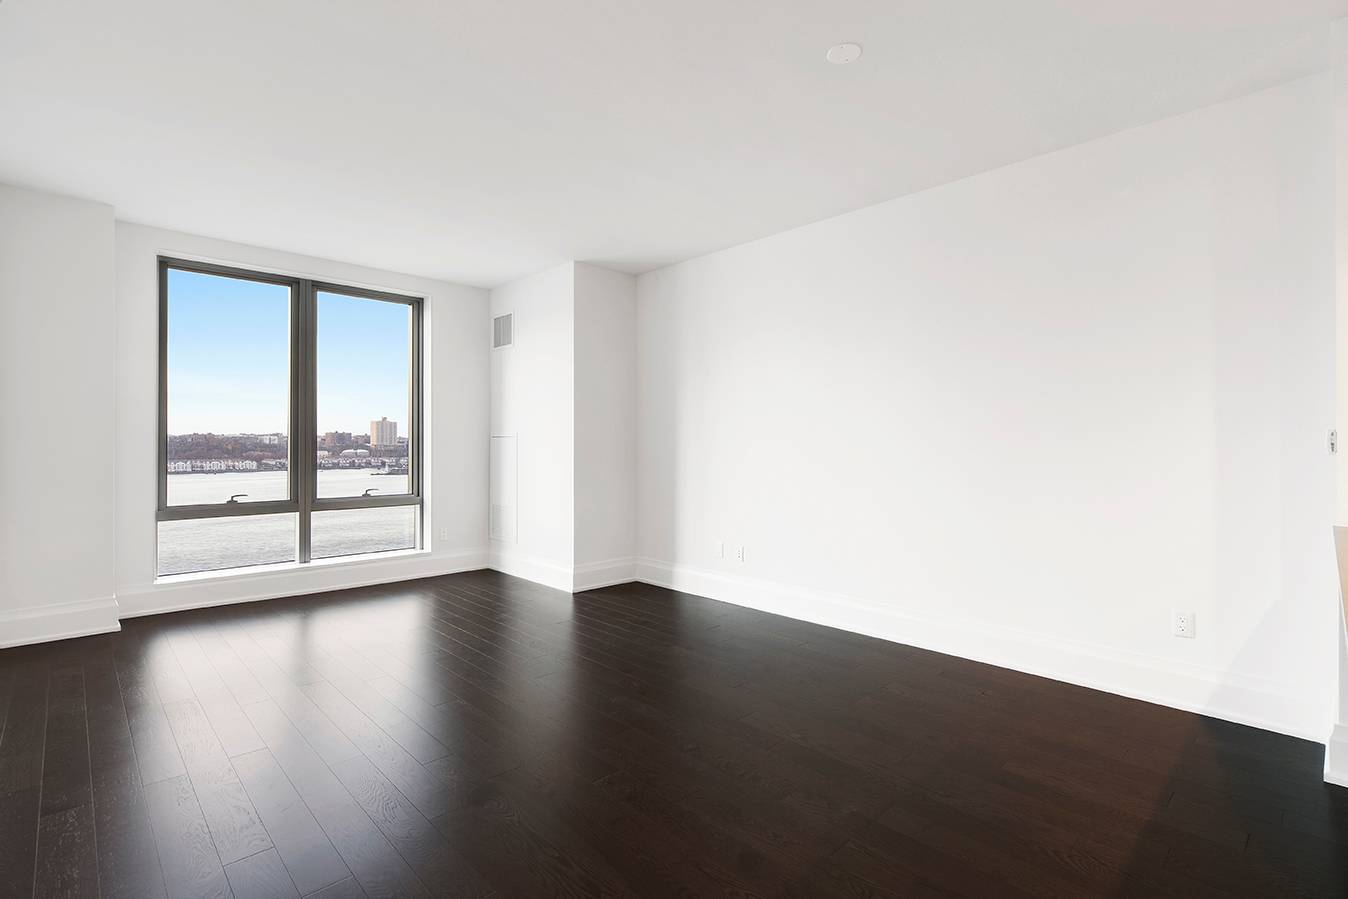  Spectacular Hudson River Views! Brand New 3BR/3.5 Bath Luxury Condo - Furnished or Unfurnished